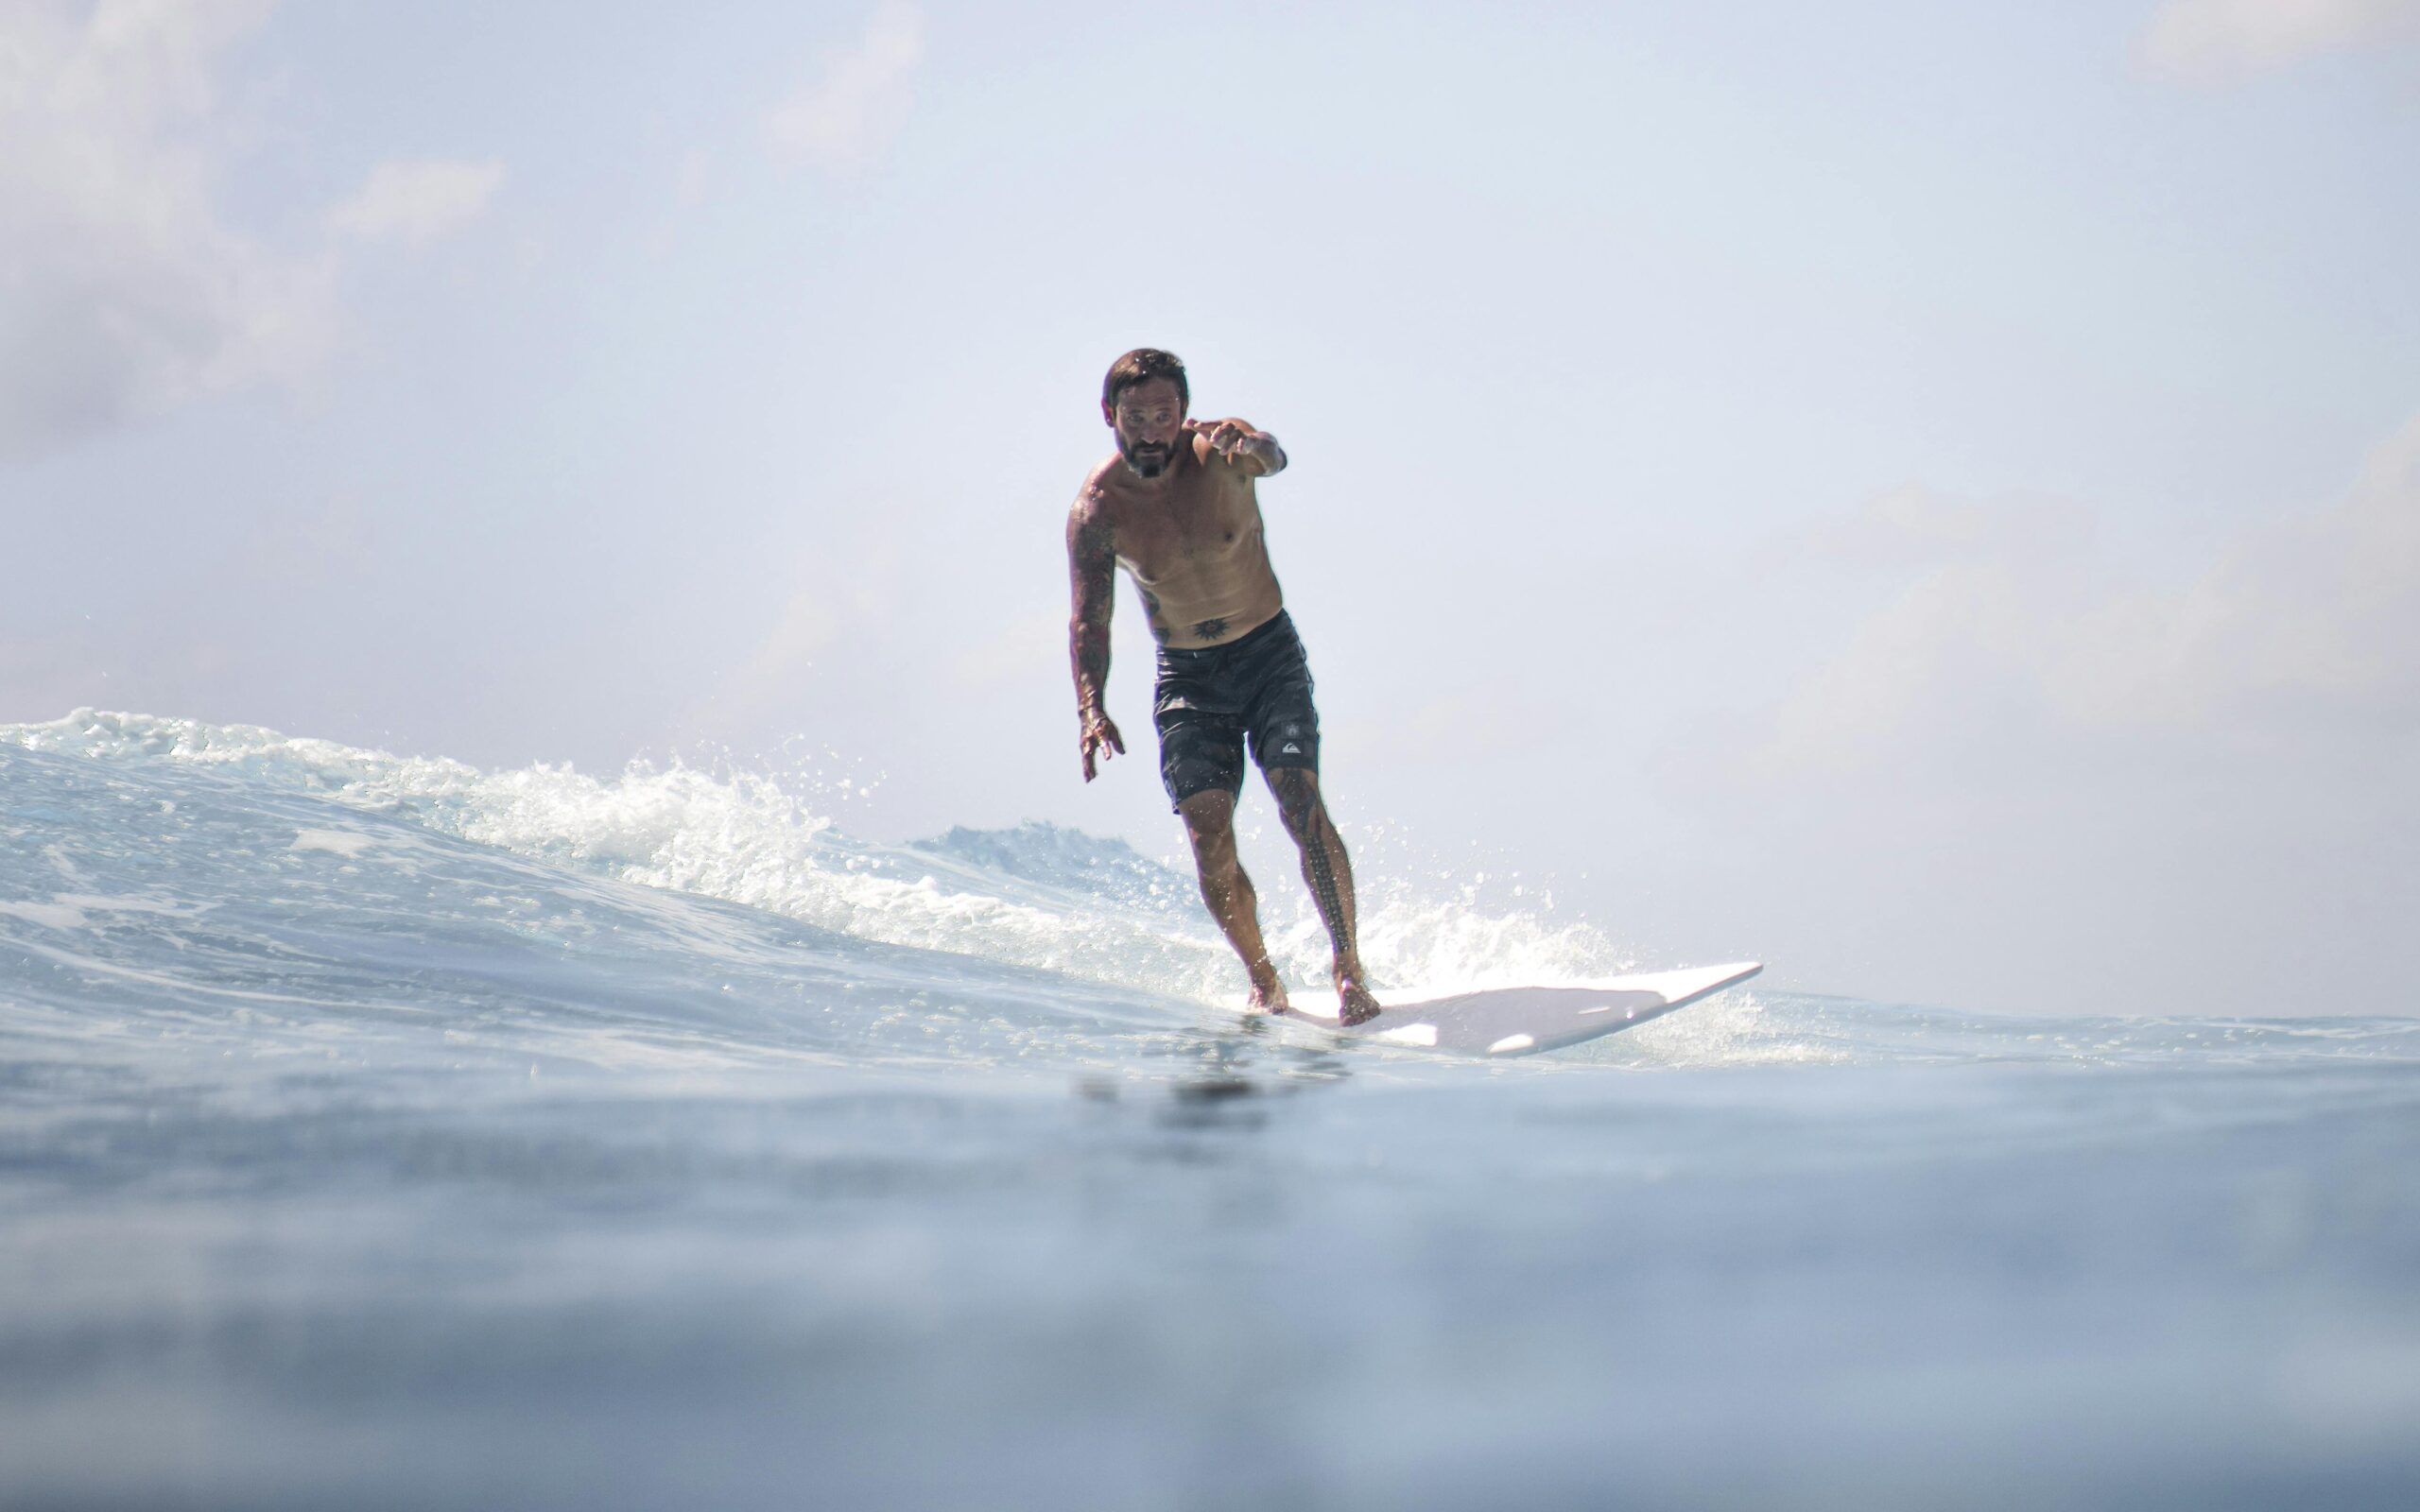 Where to Look While Turning on a Surfboard